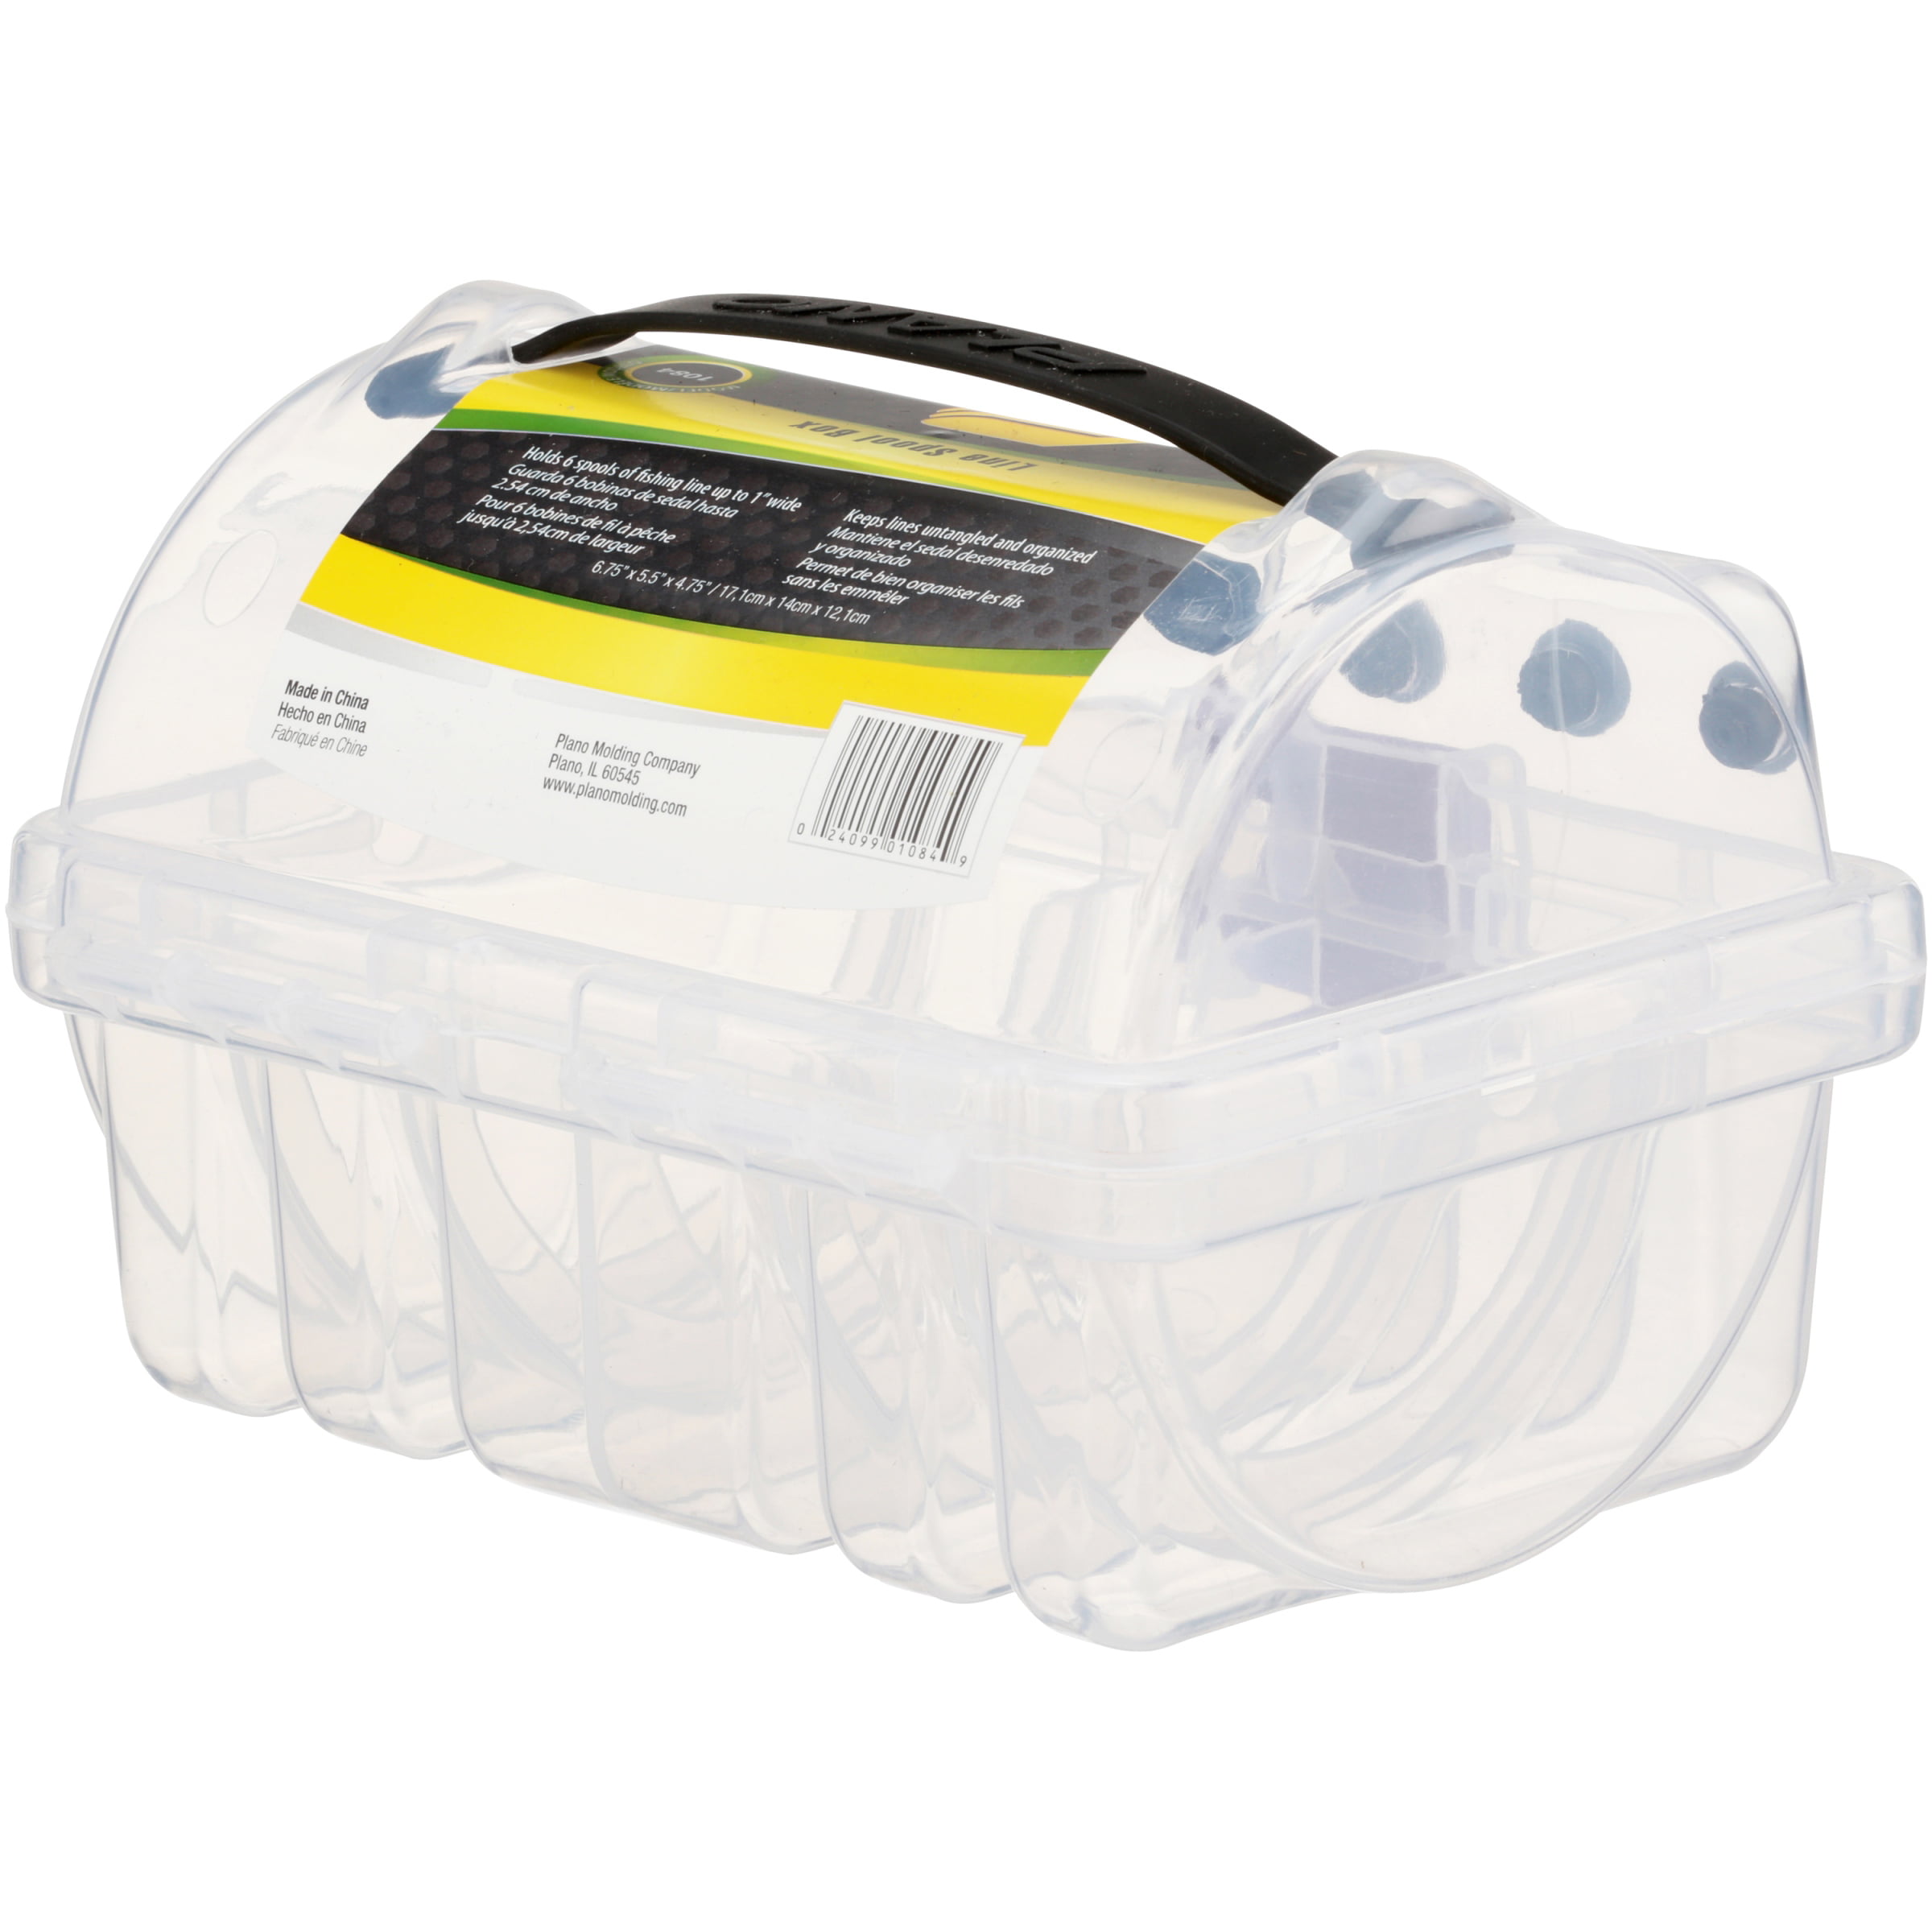 Line Spool Box Clear And Small Transparent For Quick Identification Of Contents 